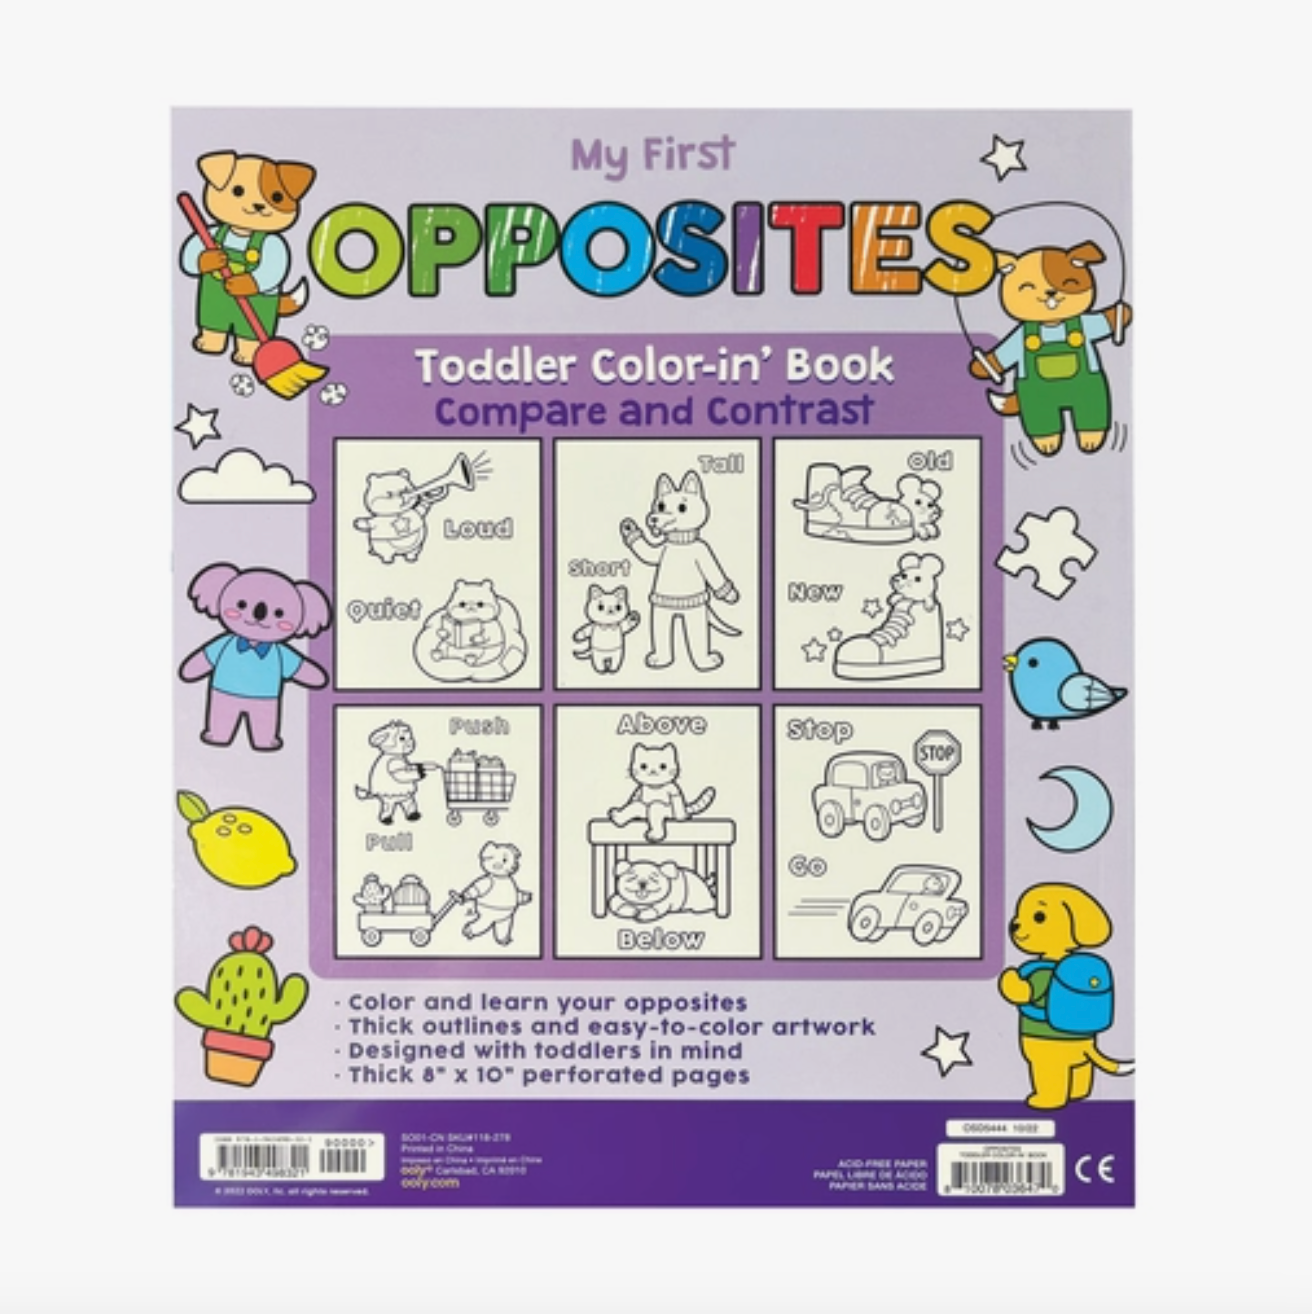 Toddler Coloring Book: Opposites